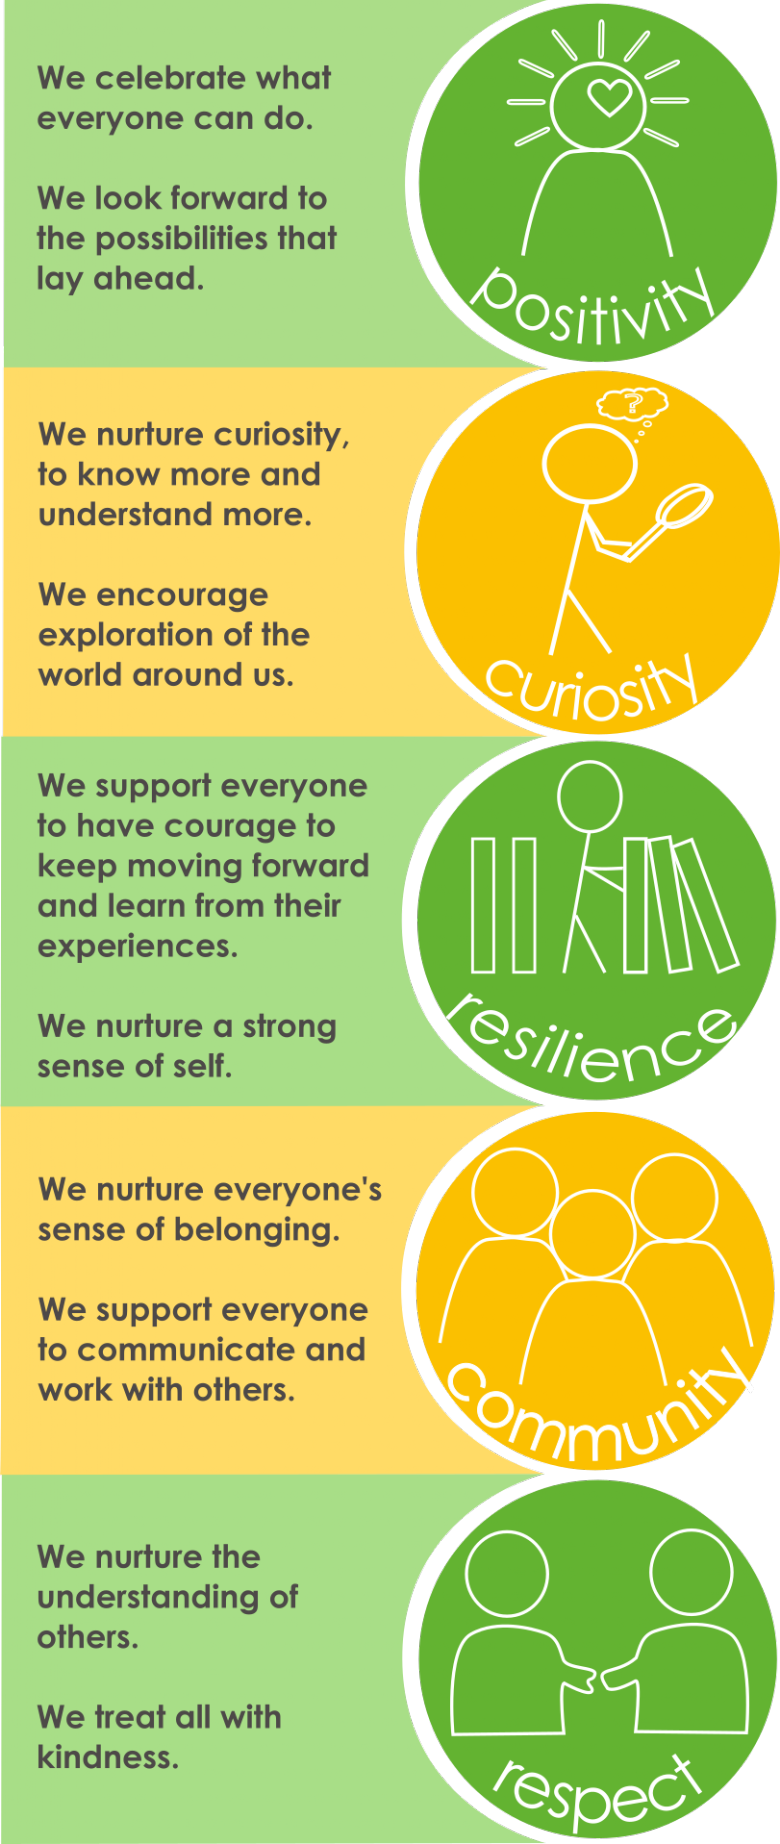 A summary of the 5 core values